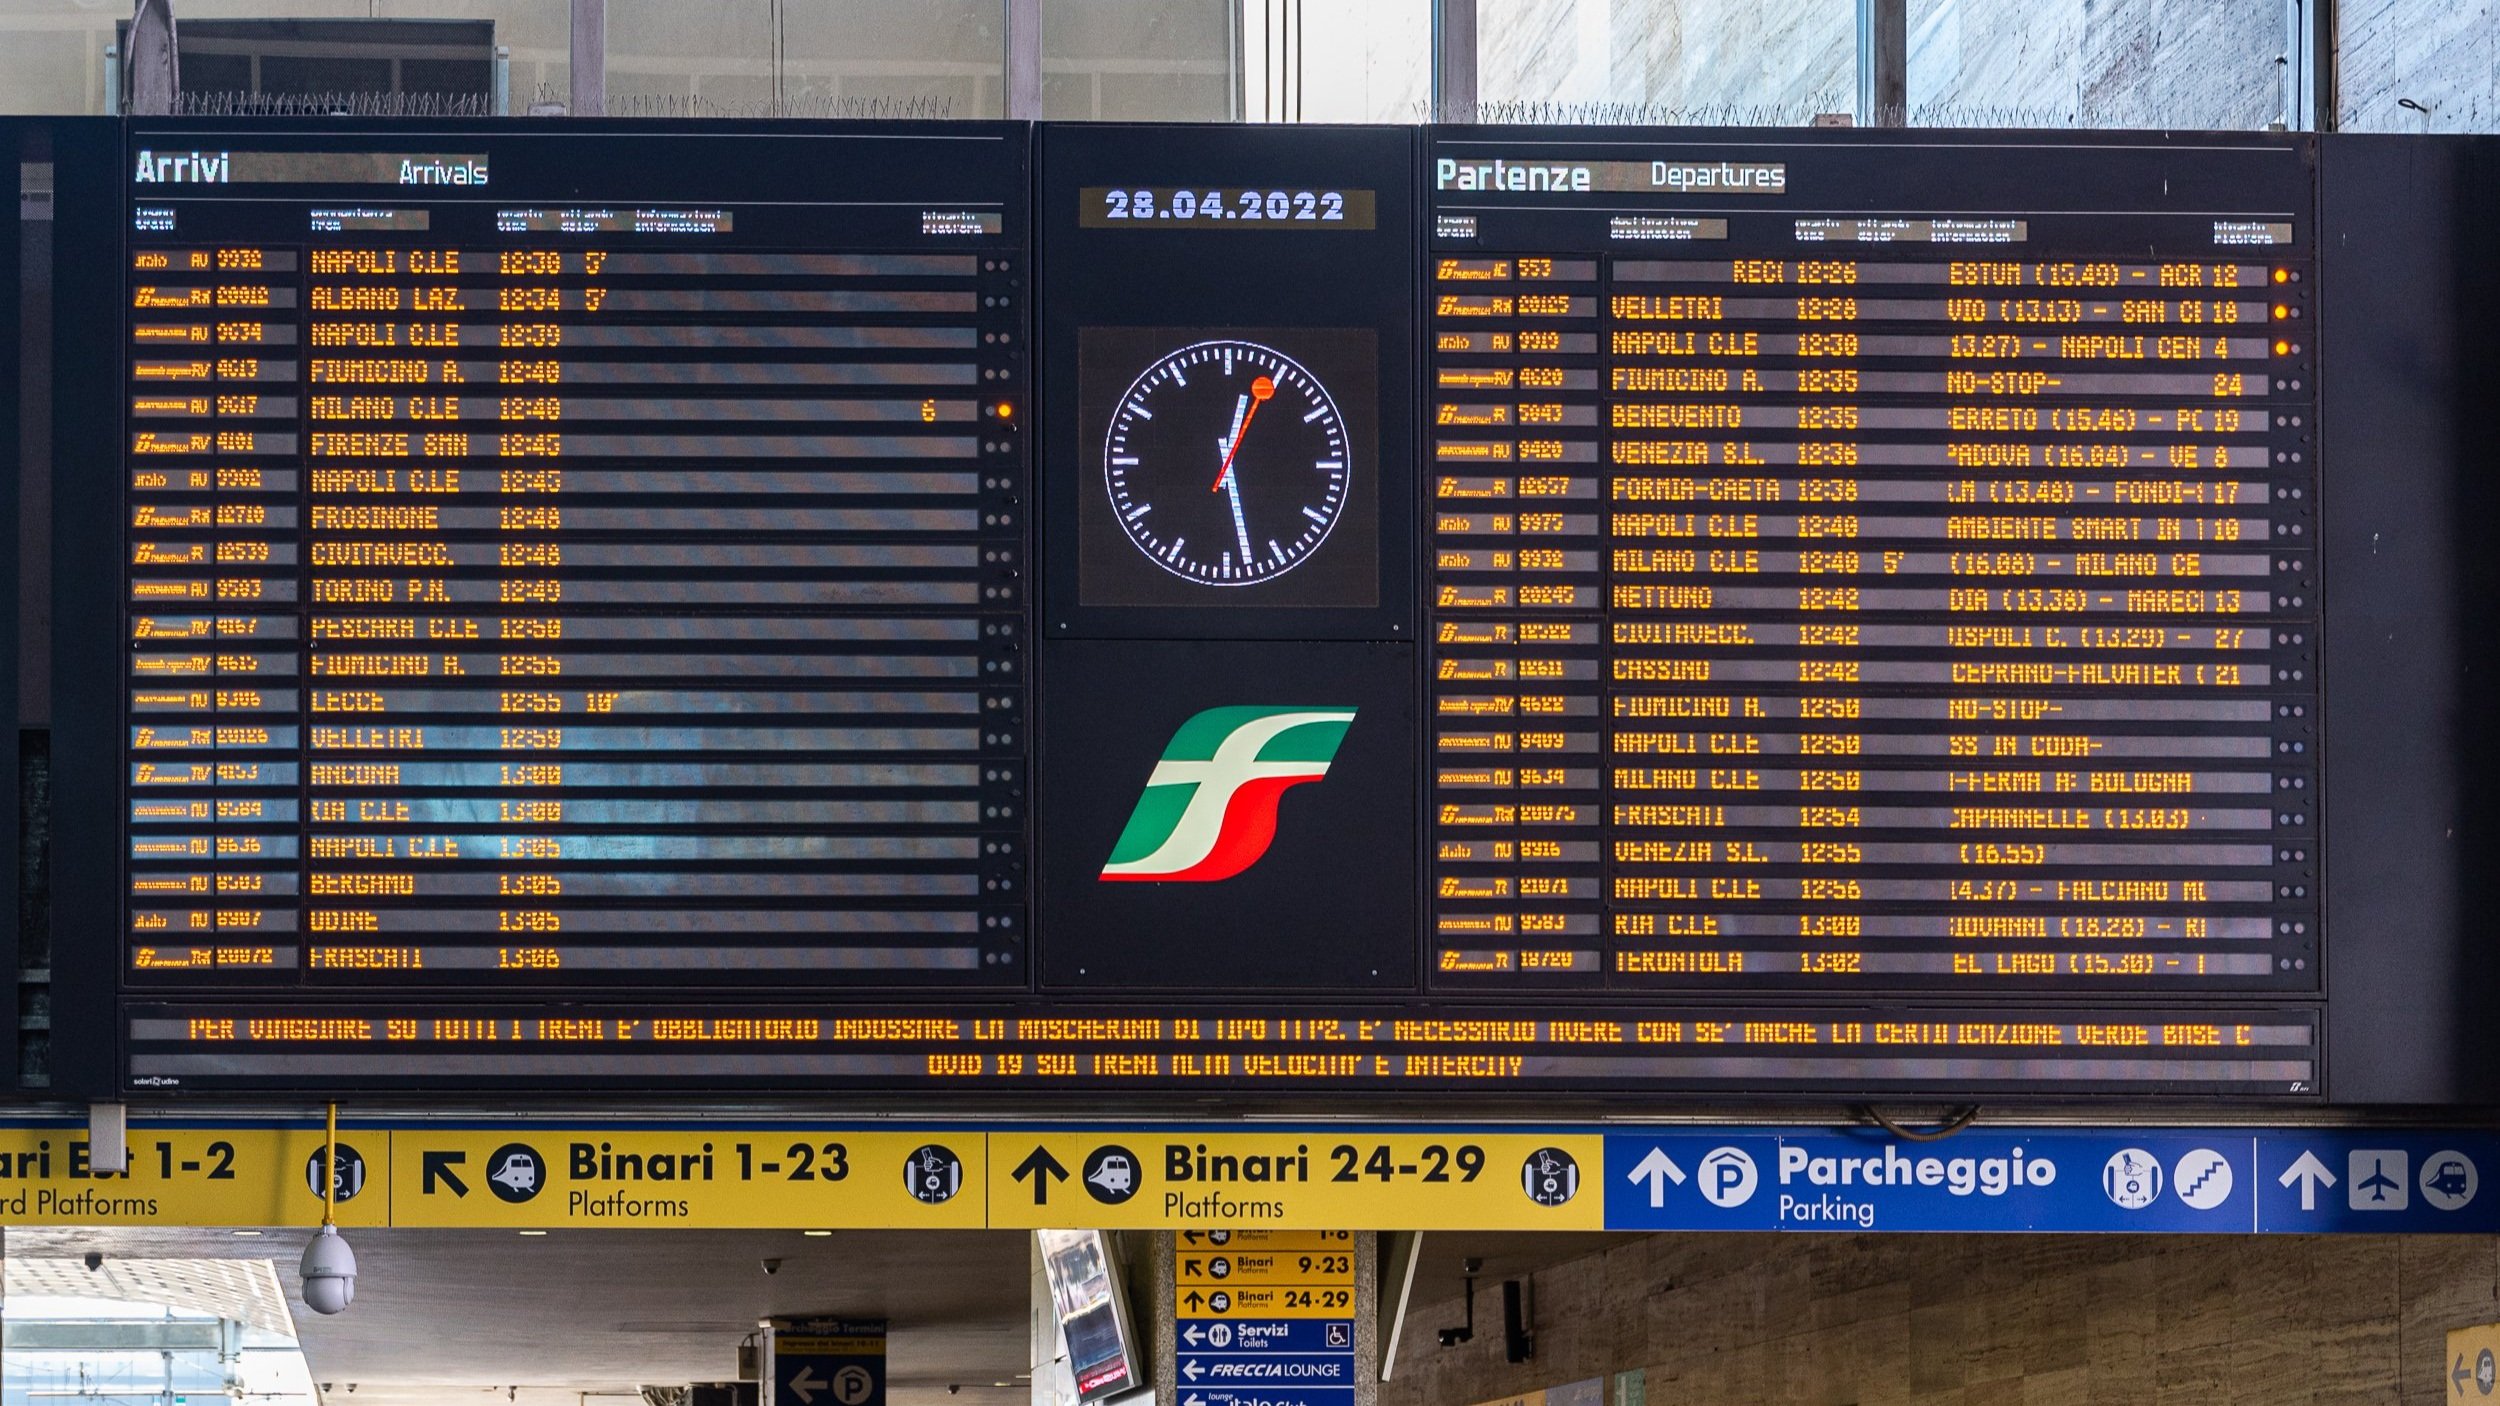 Train Travel In Italy - Arrivals and Departures